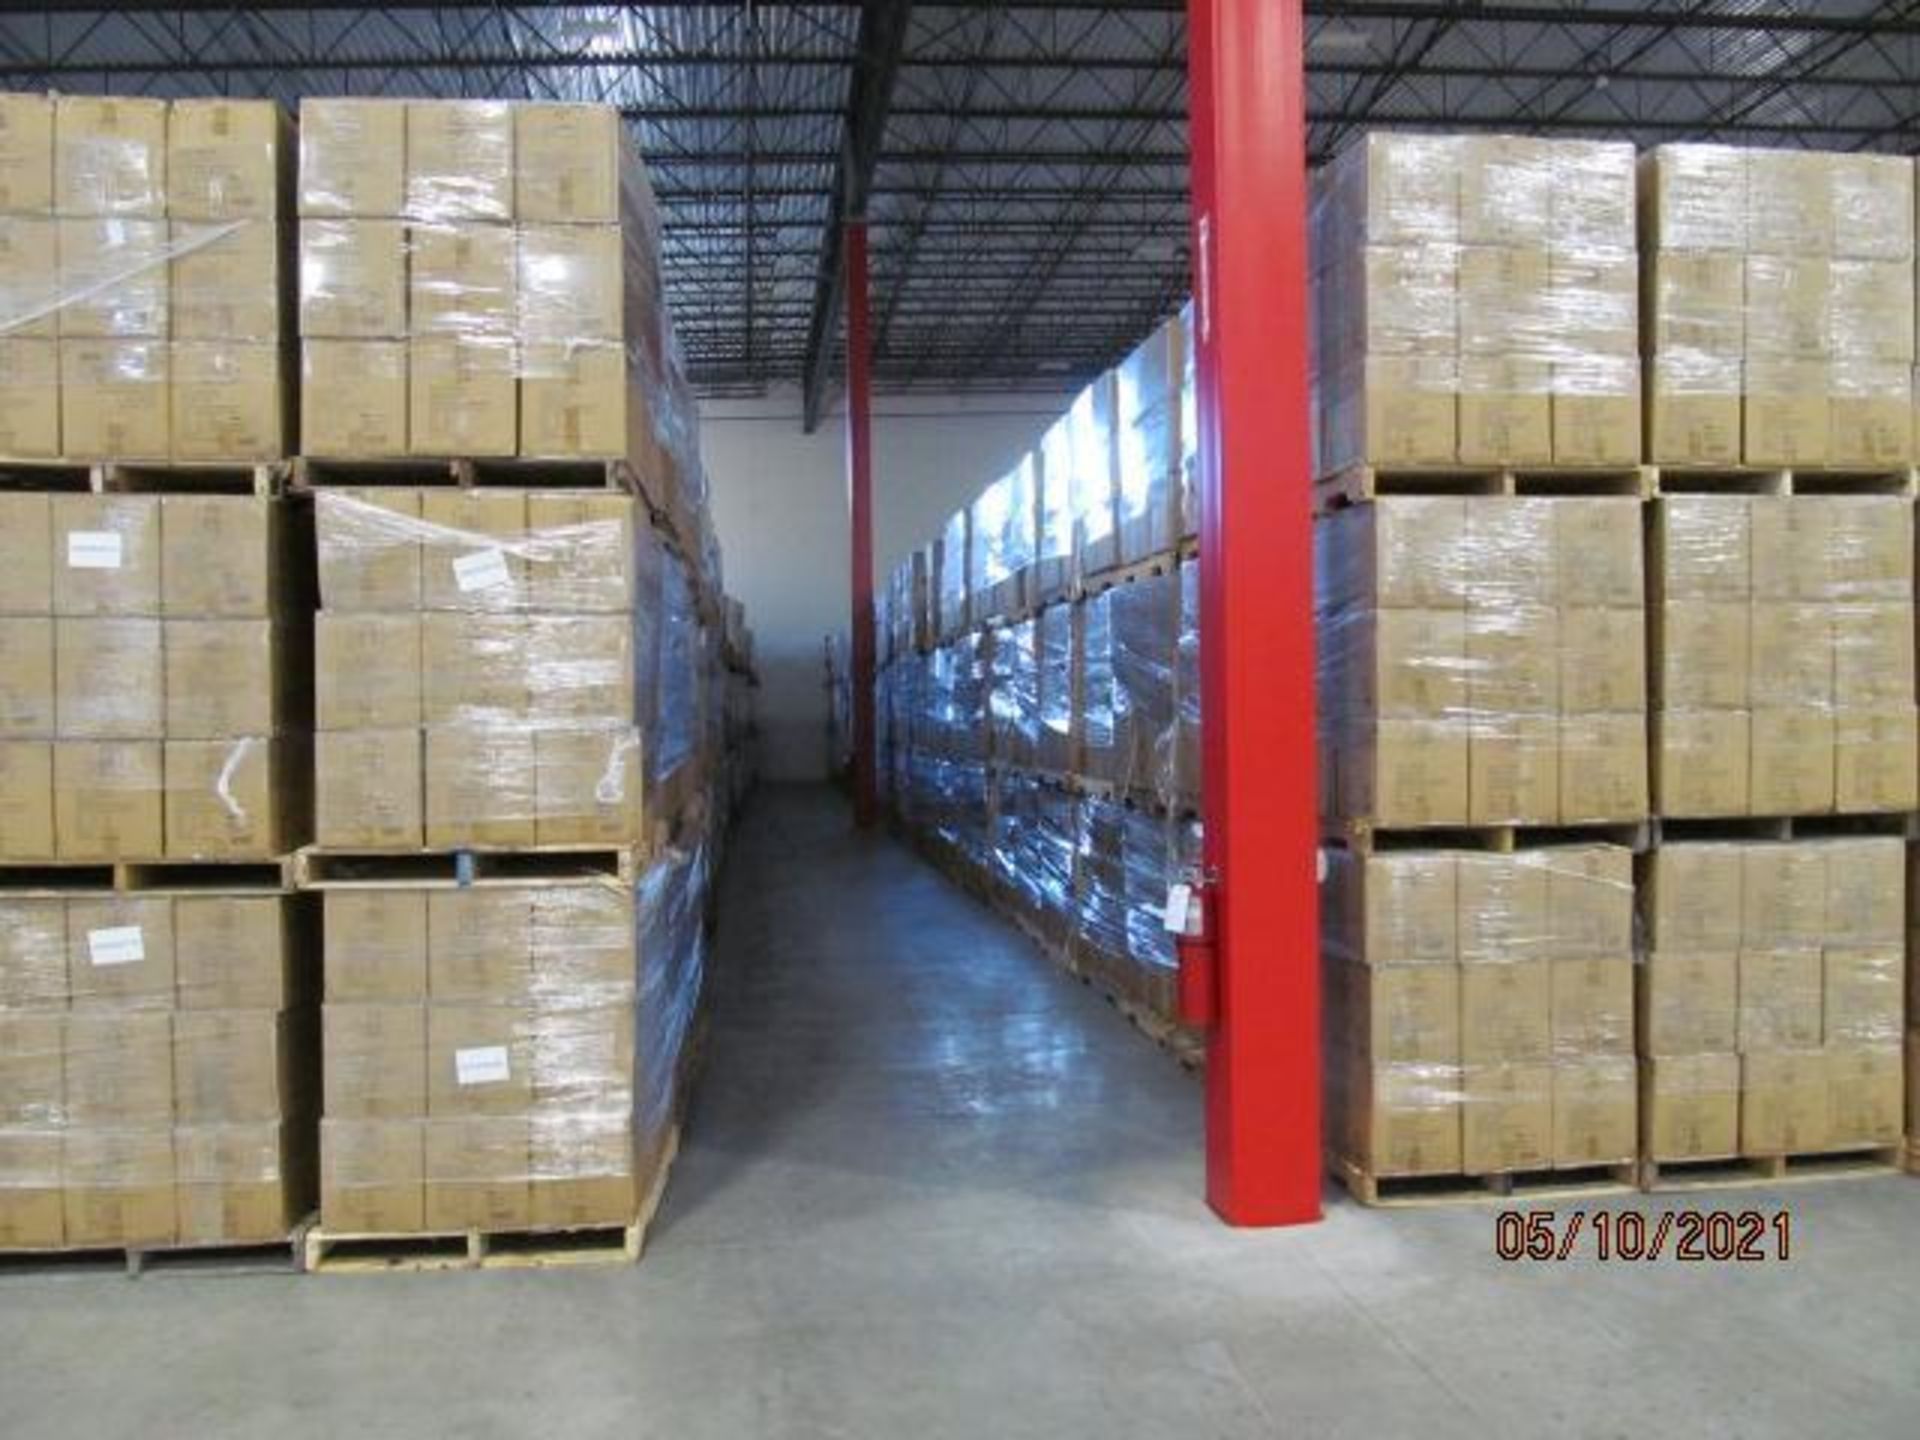 Lot of Waxman Kleen Freak Sanitizing Wipes consisting of 33,696 packages on 52 pallets. Each package - Image 9 of 11